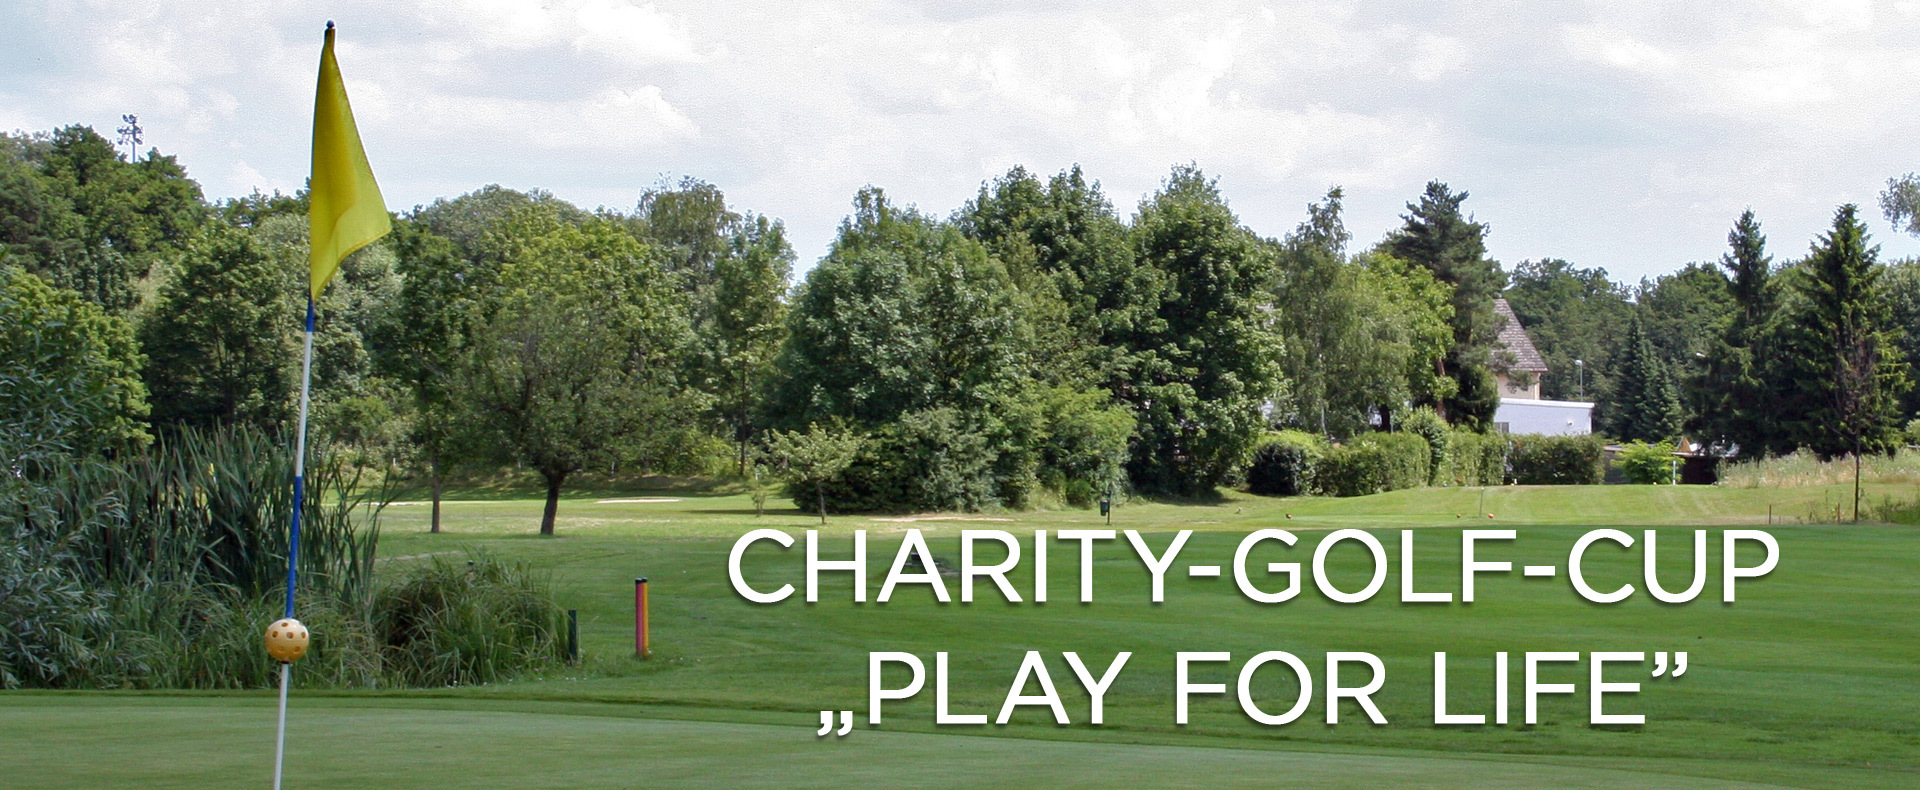 19. CHARITY-GOLF-CUP (© Great Lengths)